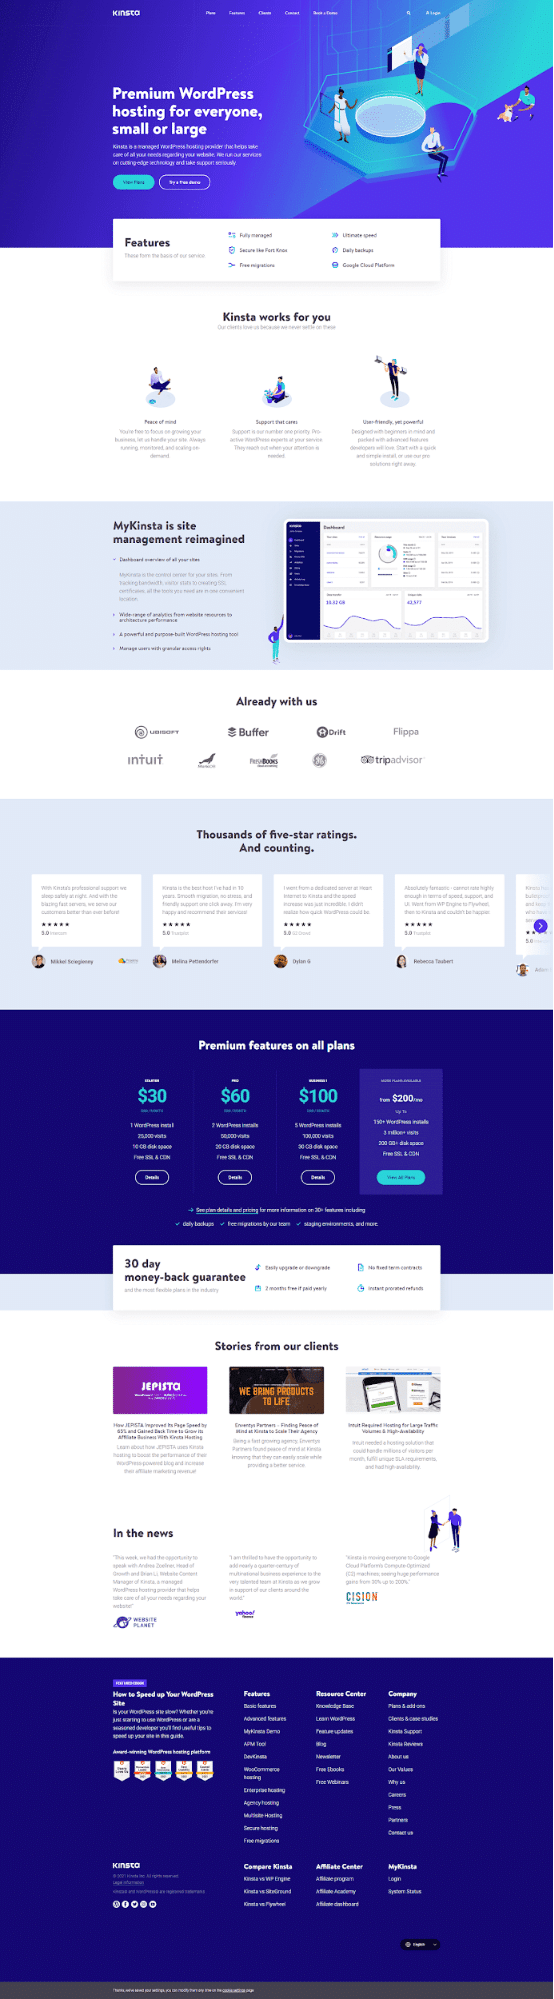 A full-page screenshot of the Kinsta homepage.